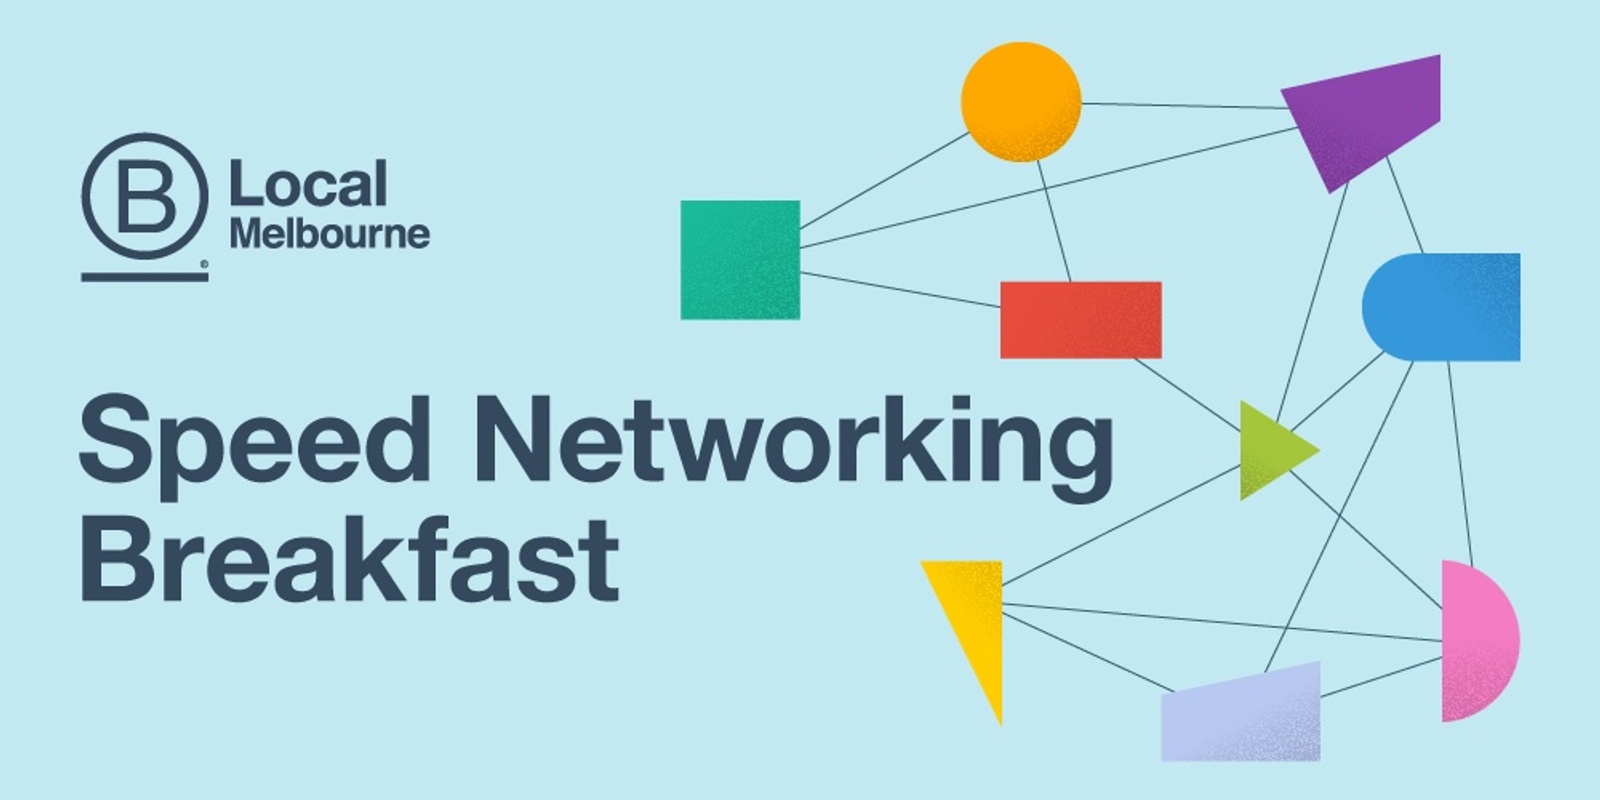 Banner image for B Local Melbourne Speed Networking Breakfast